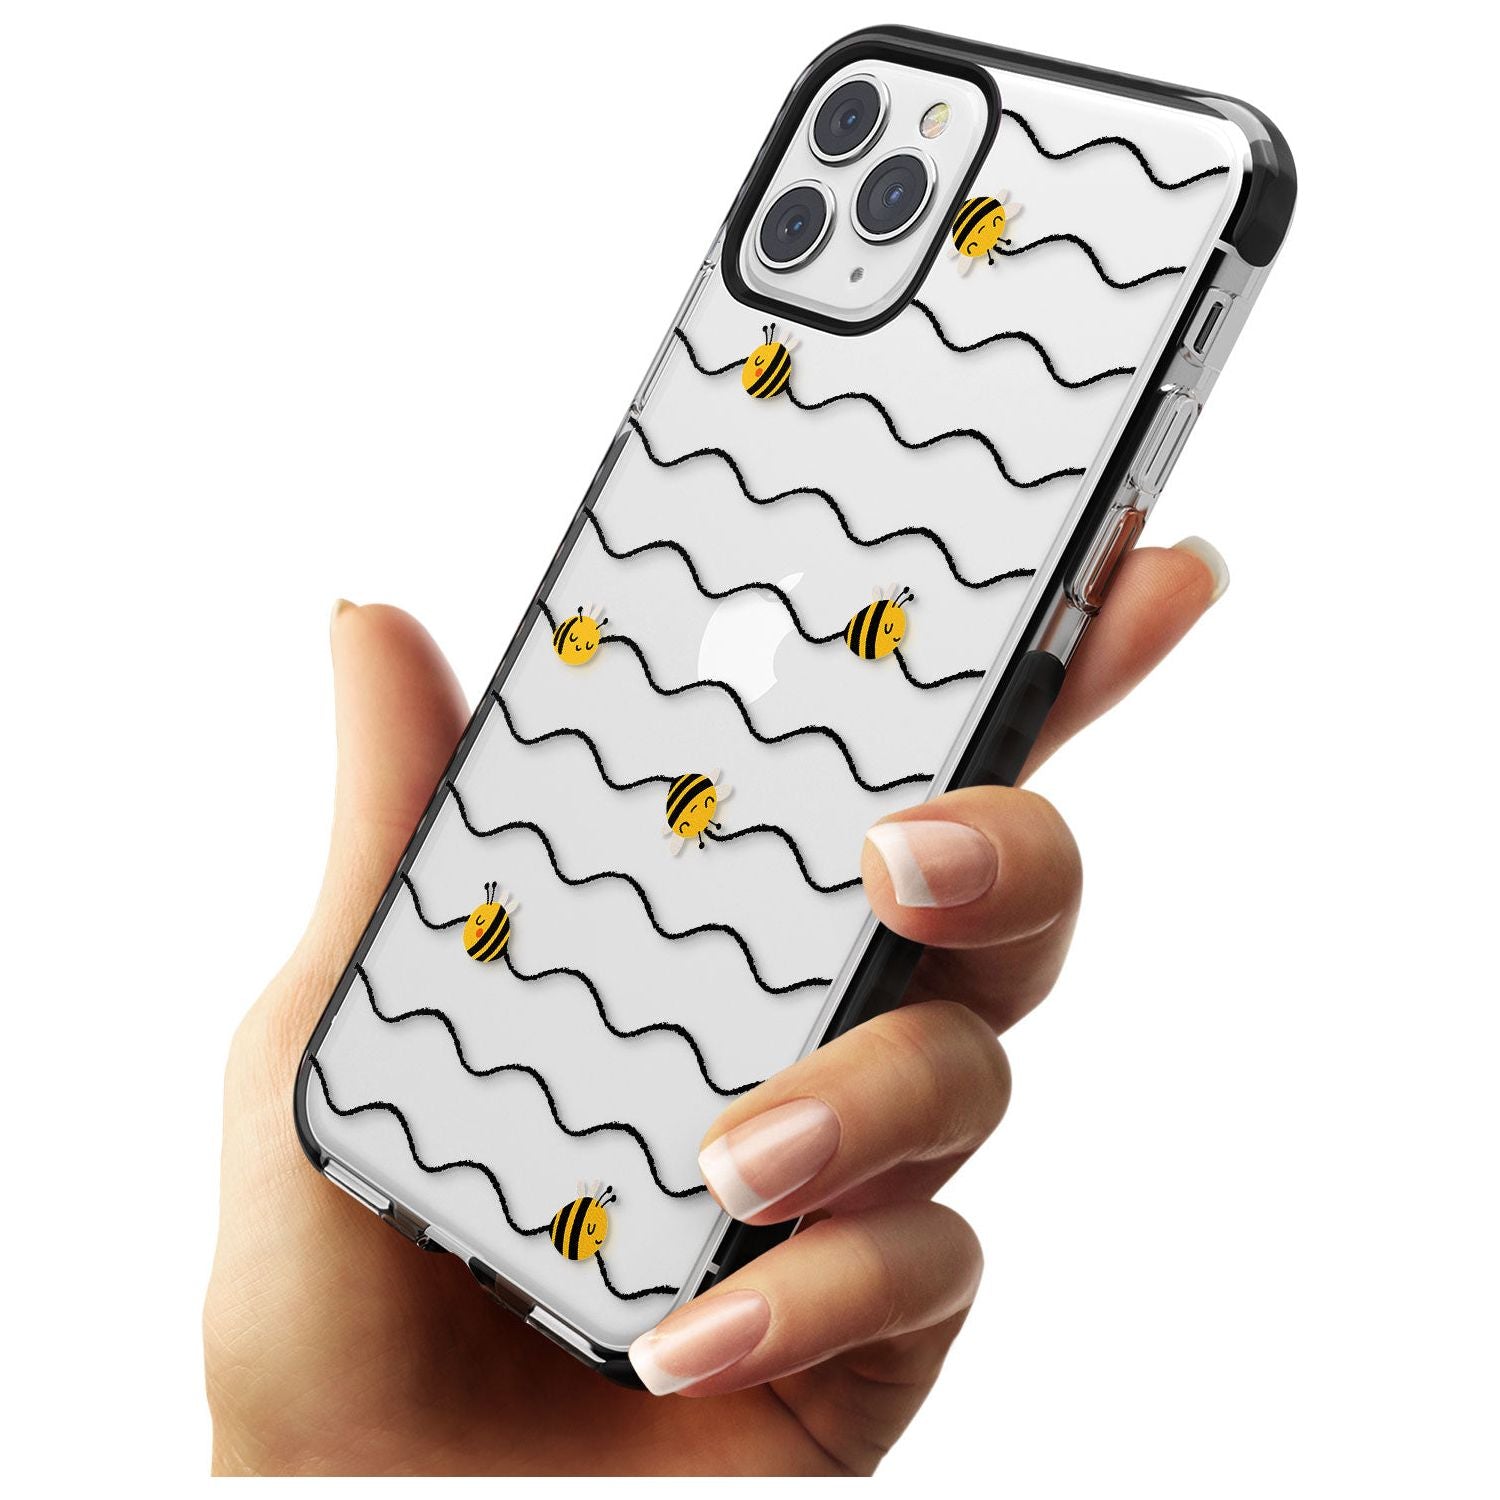 Sweet as Honey Patterns: Bees & Stripes (Clear) Black Impact Phone Case for iPhone 11 Pro Max